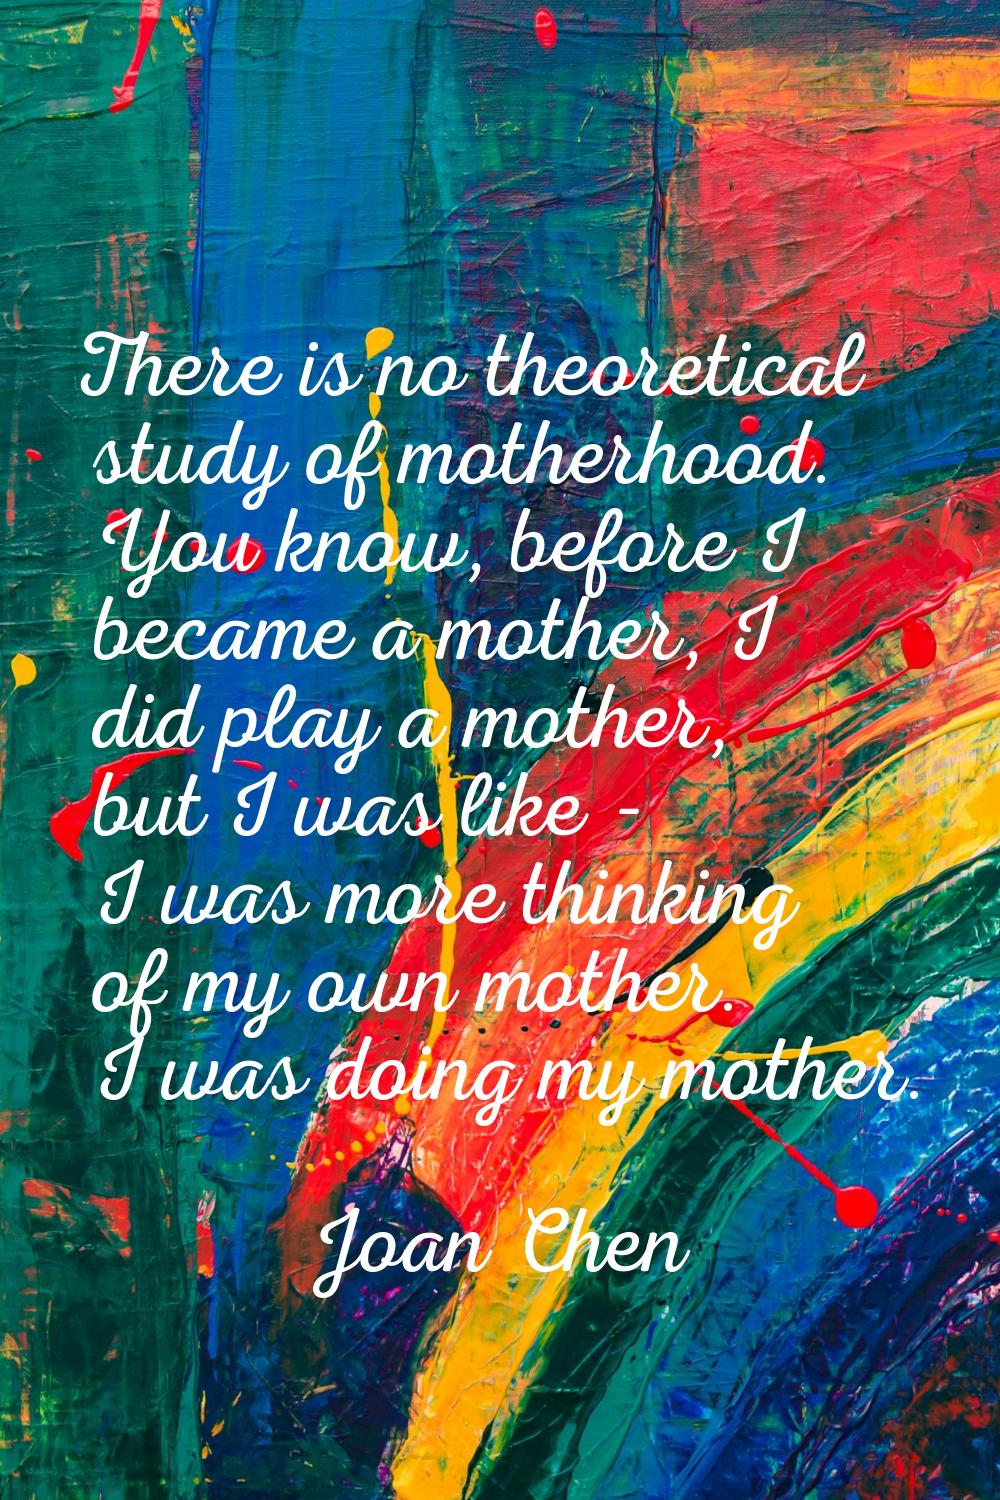 There is no theoretical study of motherhood. You know, before I became a mother, I did play a mothe